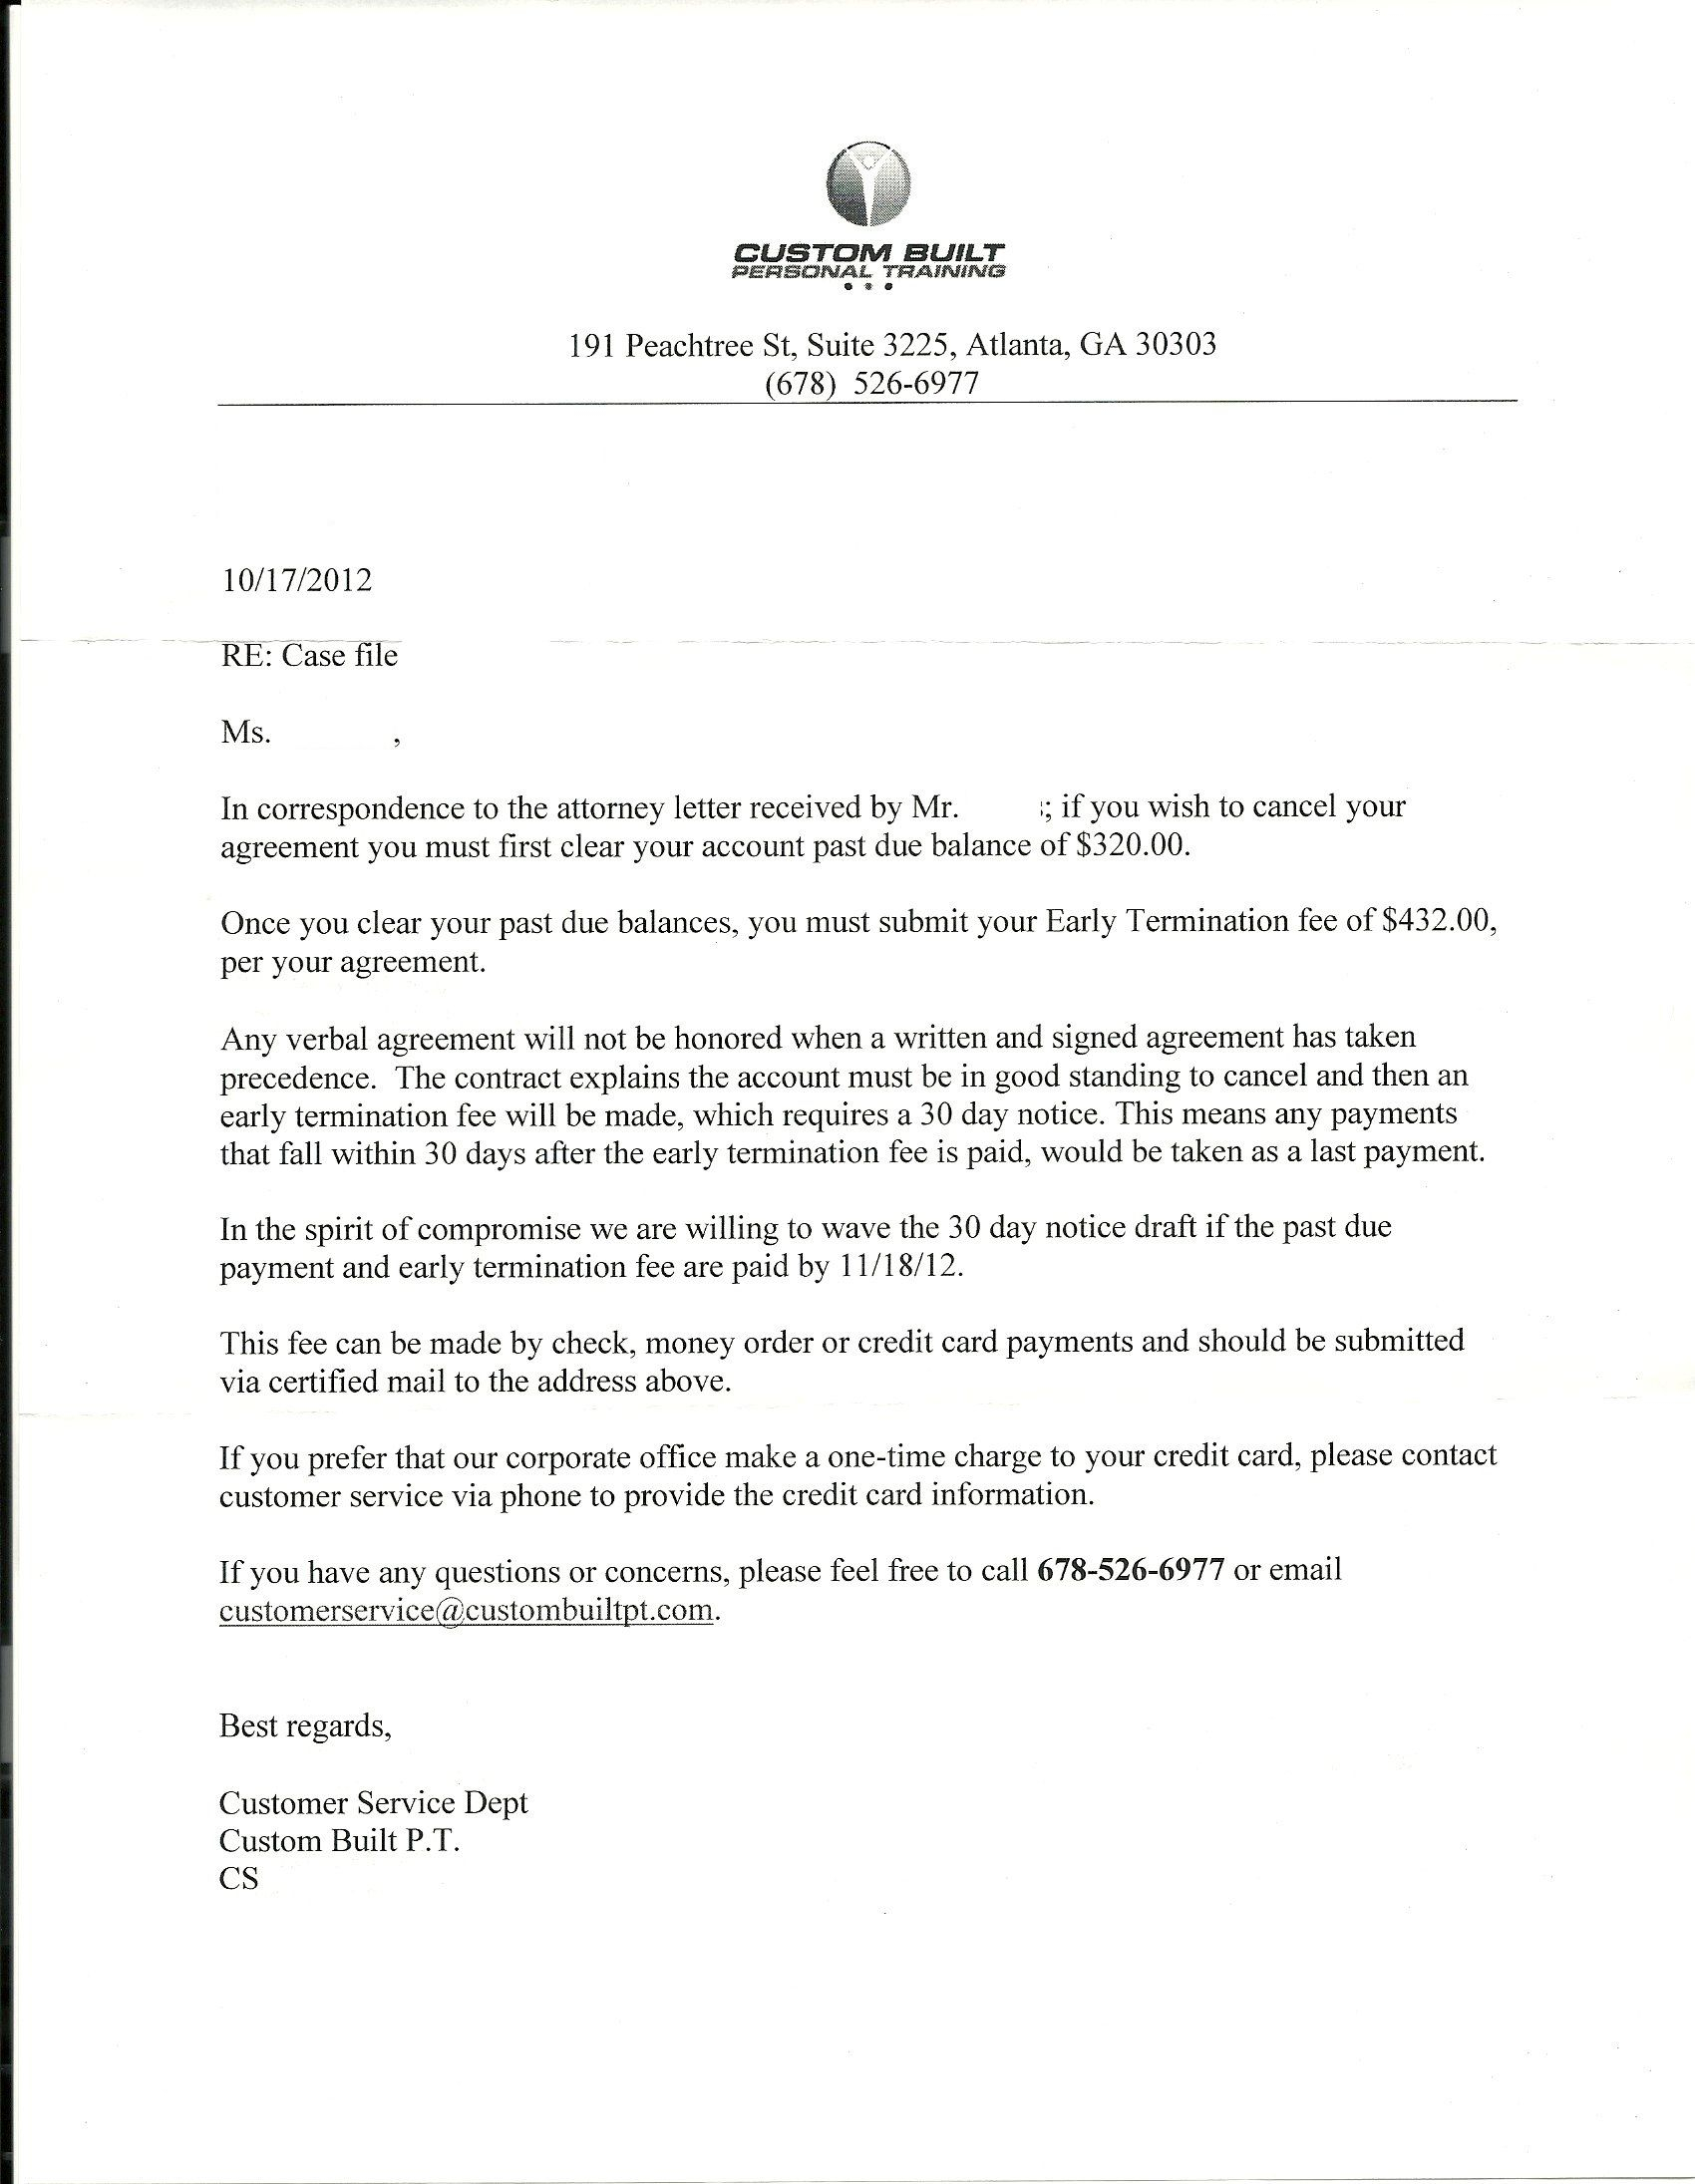 Late Rent Letter Template - Negative Response Of Seller to Claim Letter Saferbrowser Yahoo